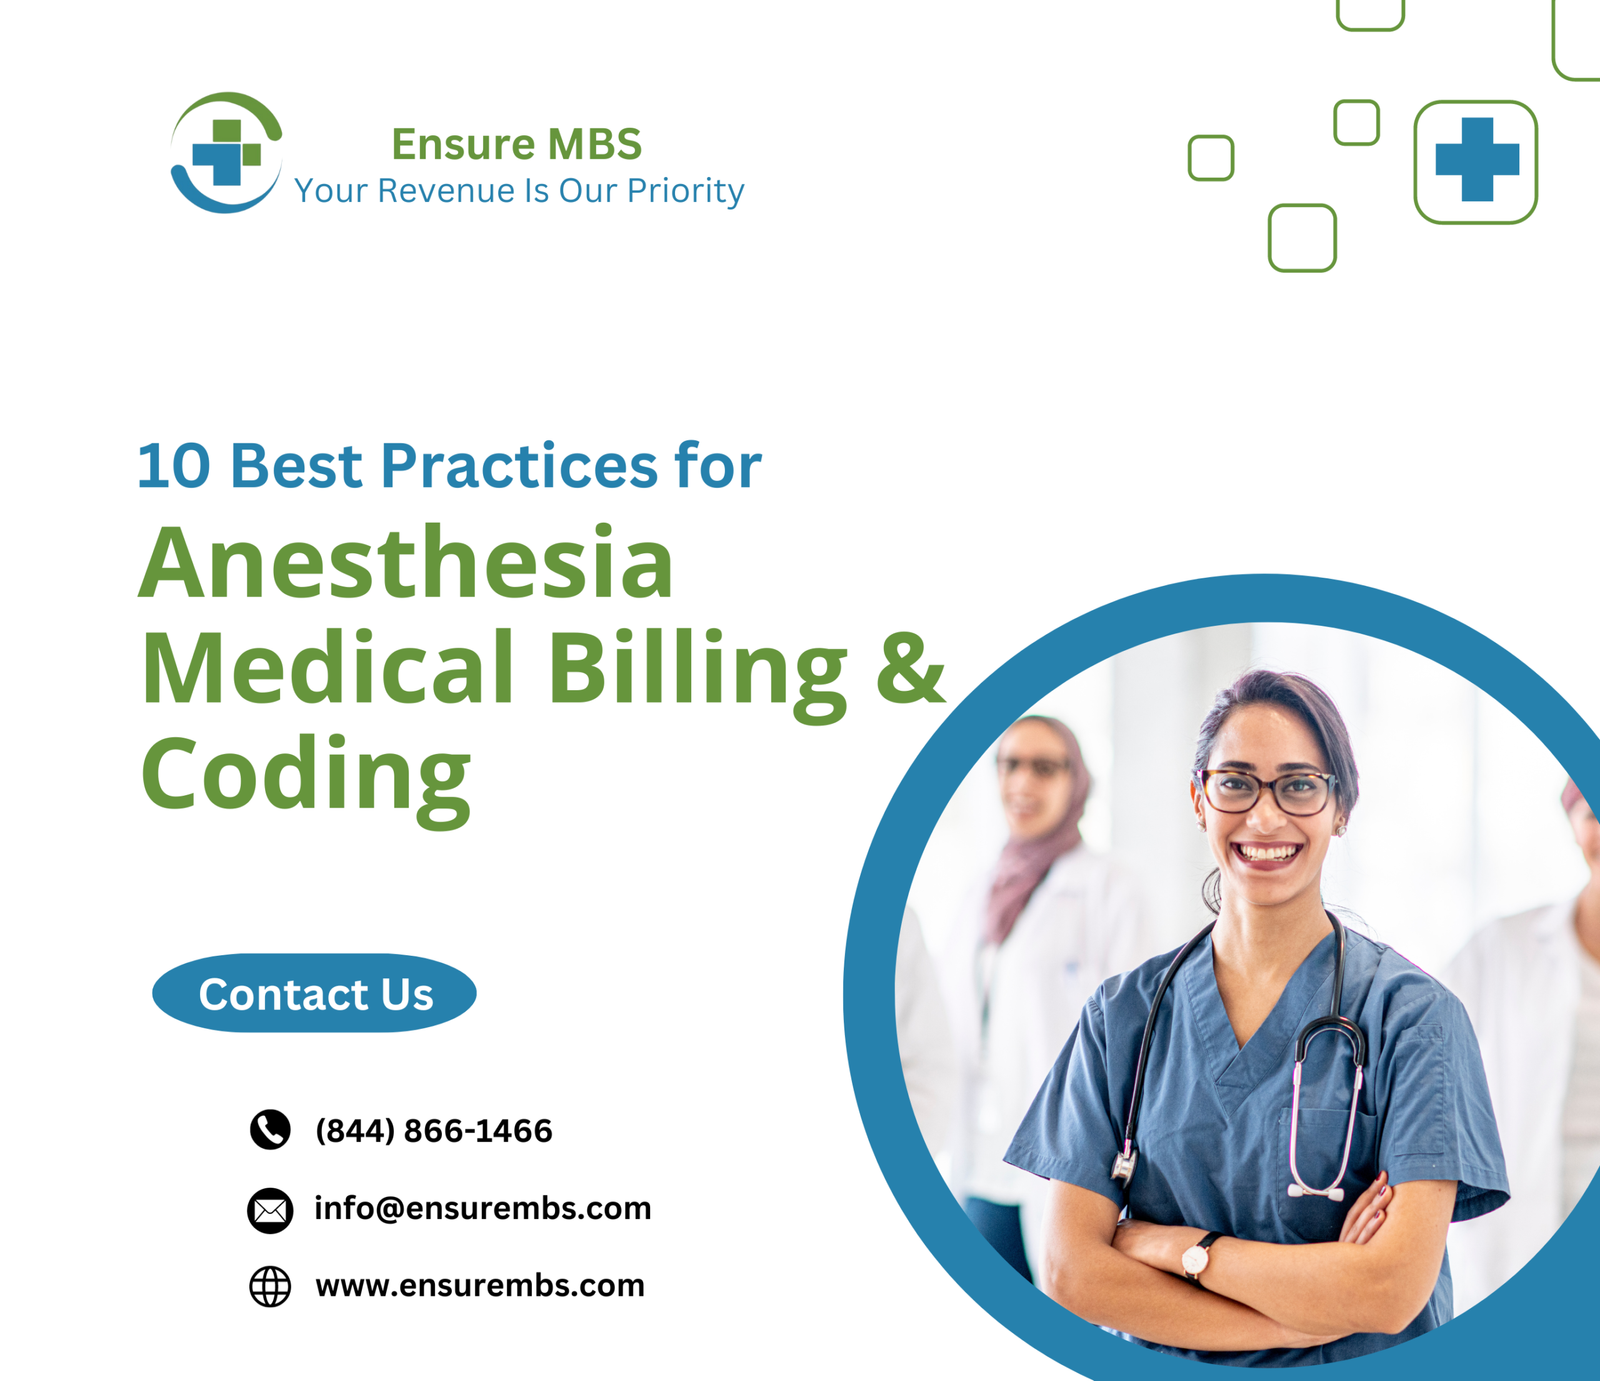 10 Best Practices for Anesthesia Medical Billing & Coding medical billing services www.ensurembs.com